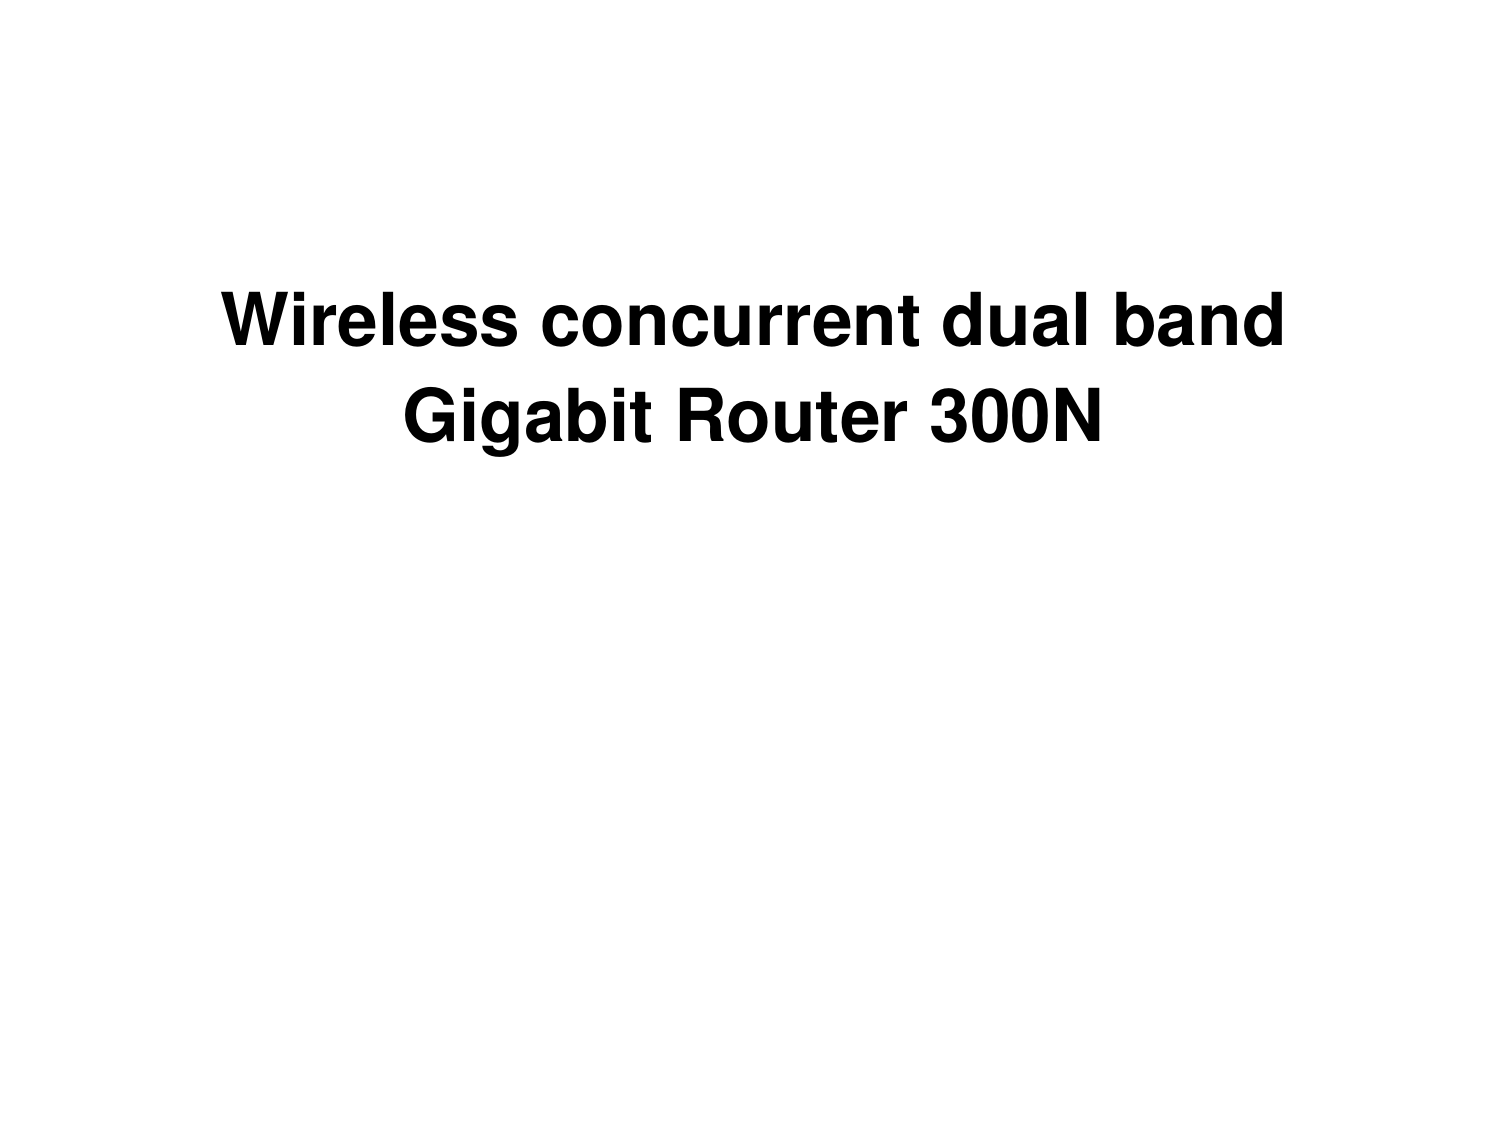   Wireless concurrent dual band Gigabit Router 300N 